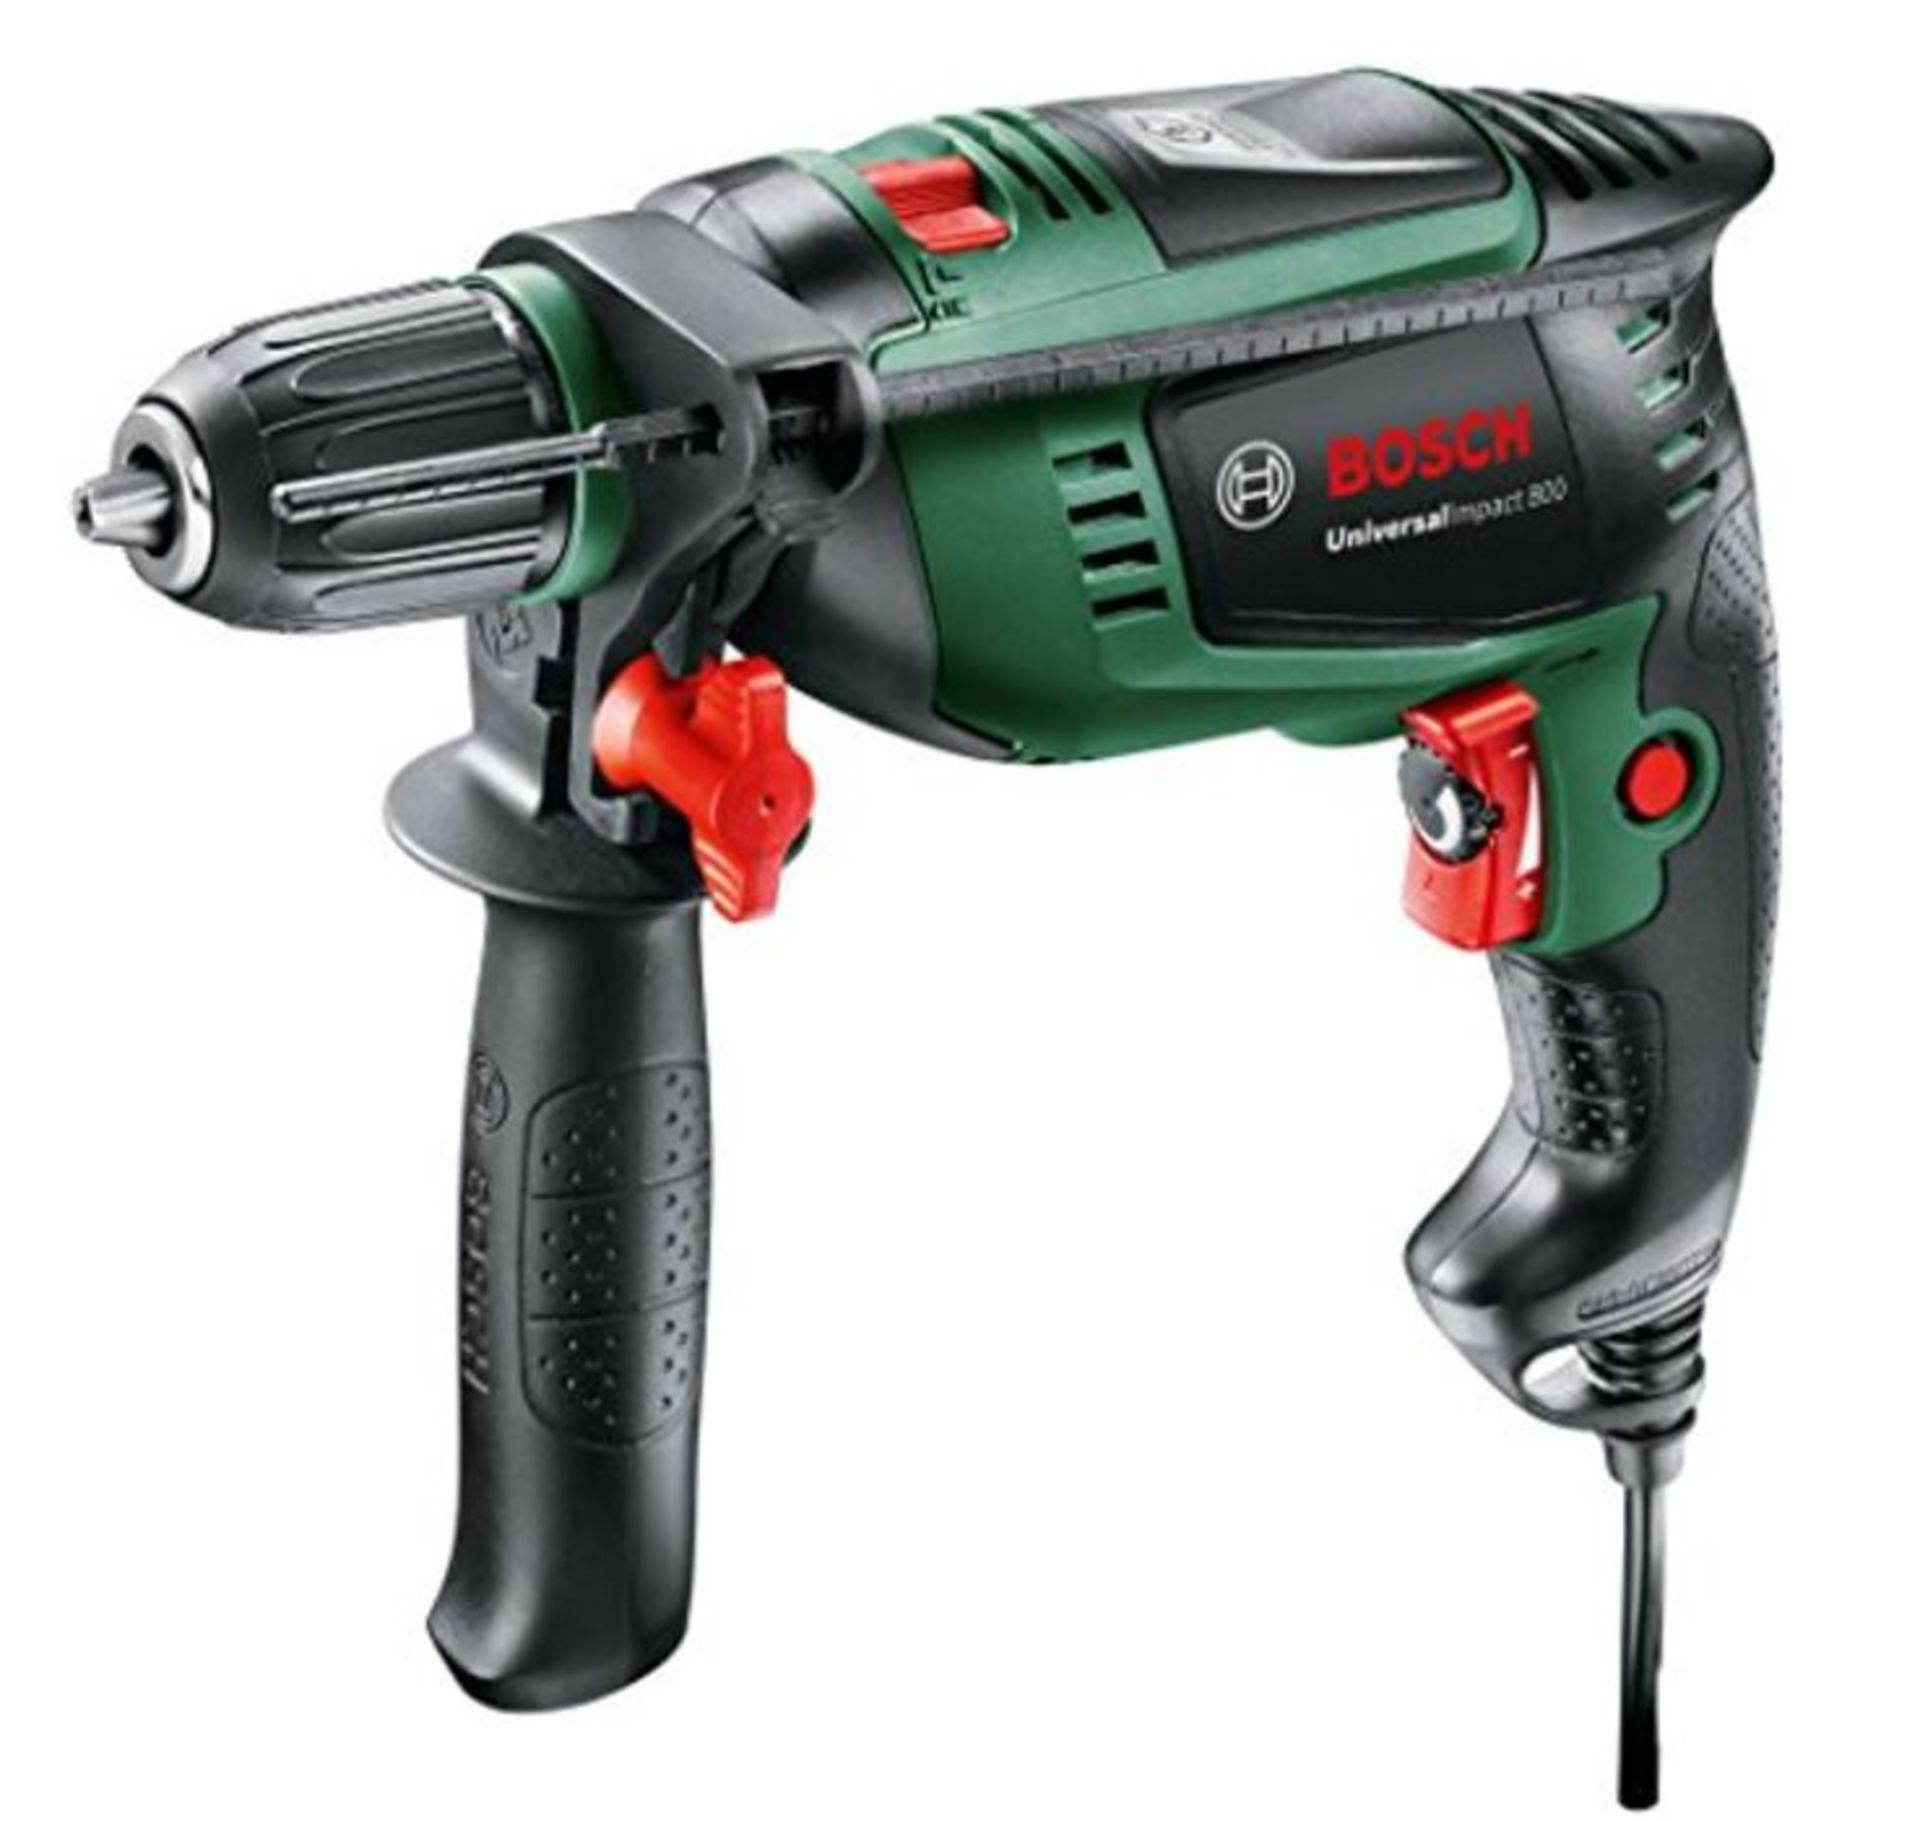 RRP £74.00 Bosch Home and Garden UniversalImpact 800 1-speed impact drill 800 W incl. suitcase